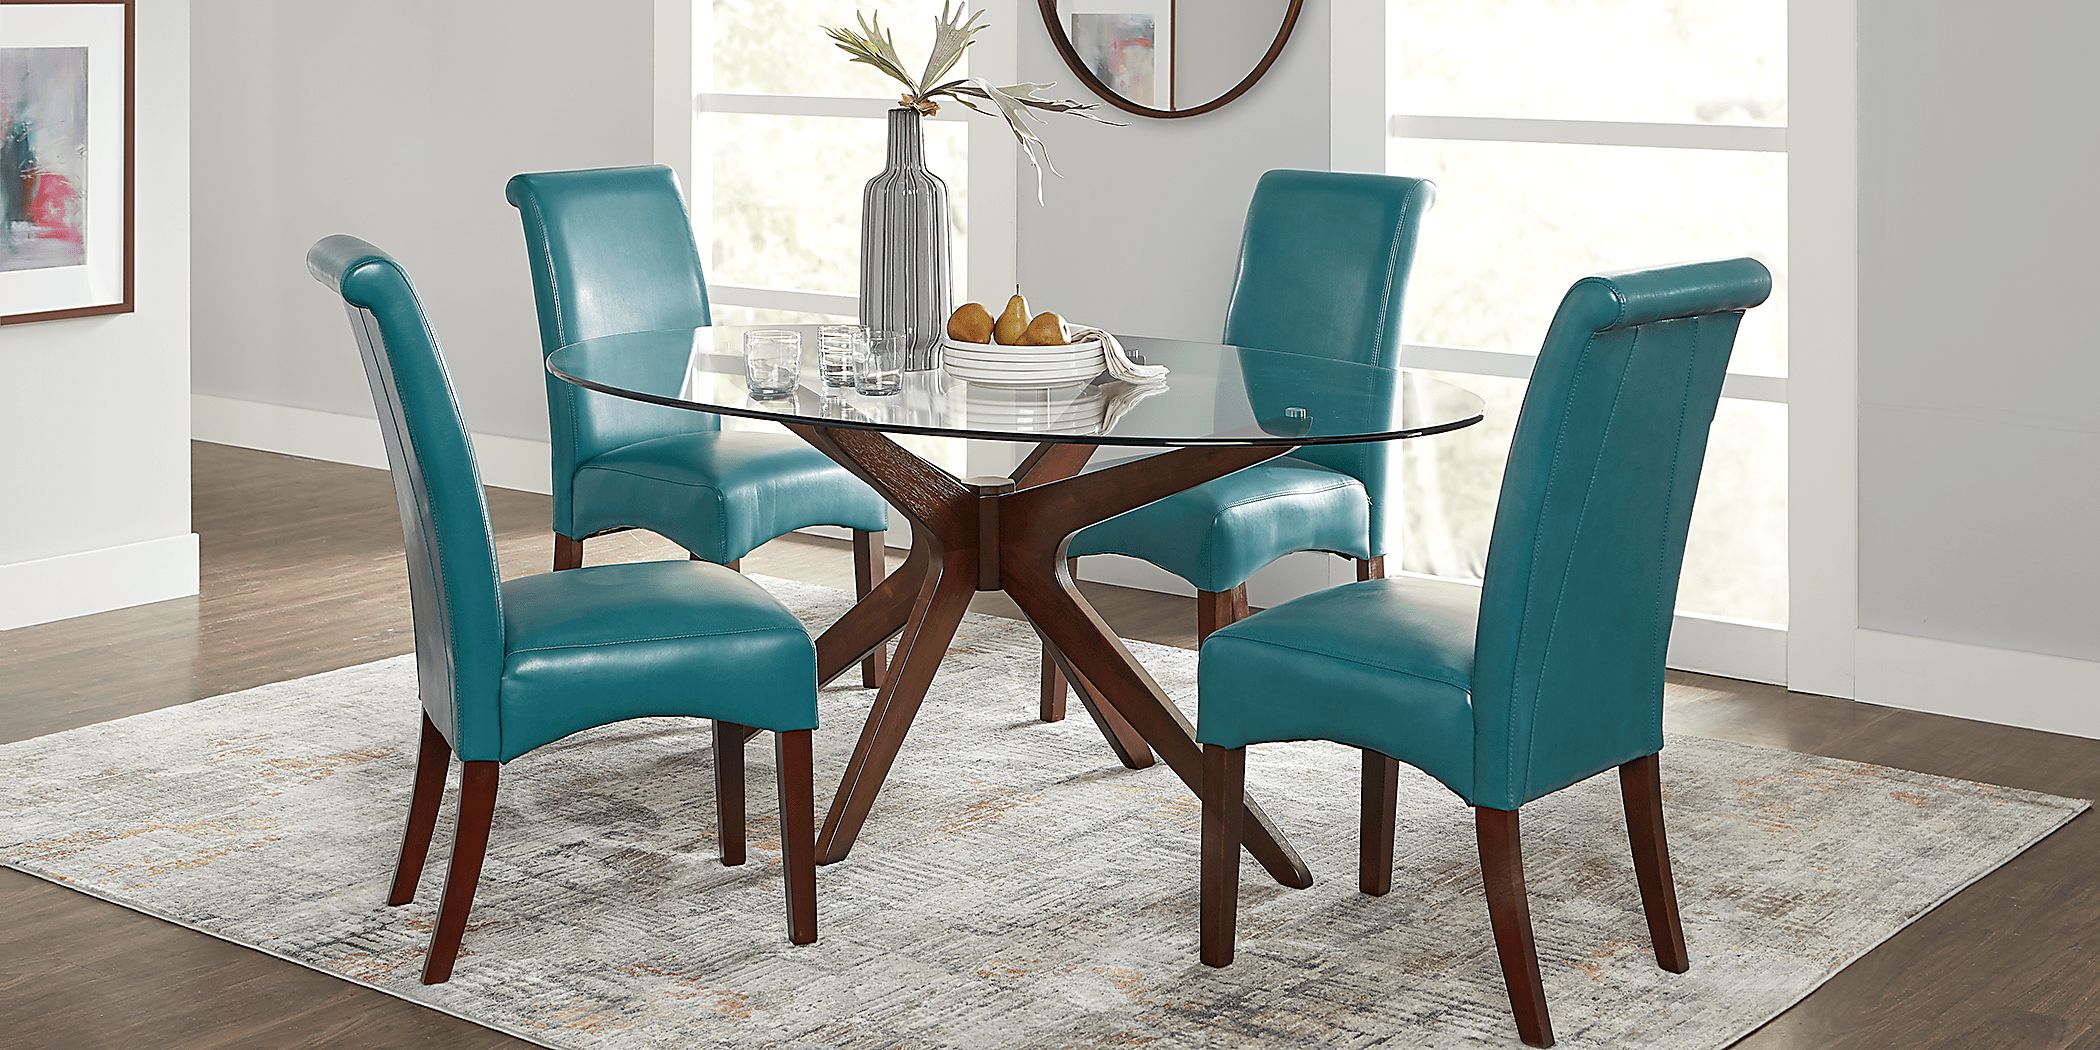 Delmon Walnut 5 Pc Oval Dining Set with Blue Chairs